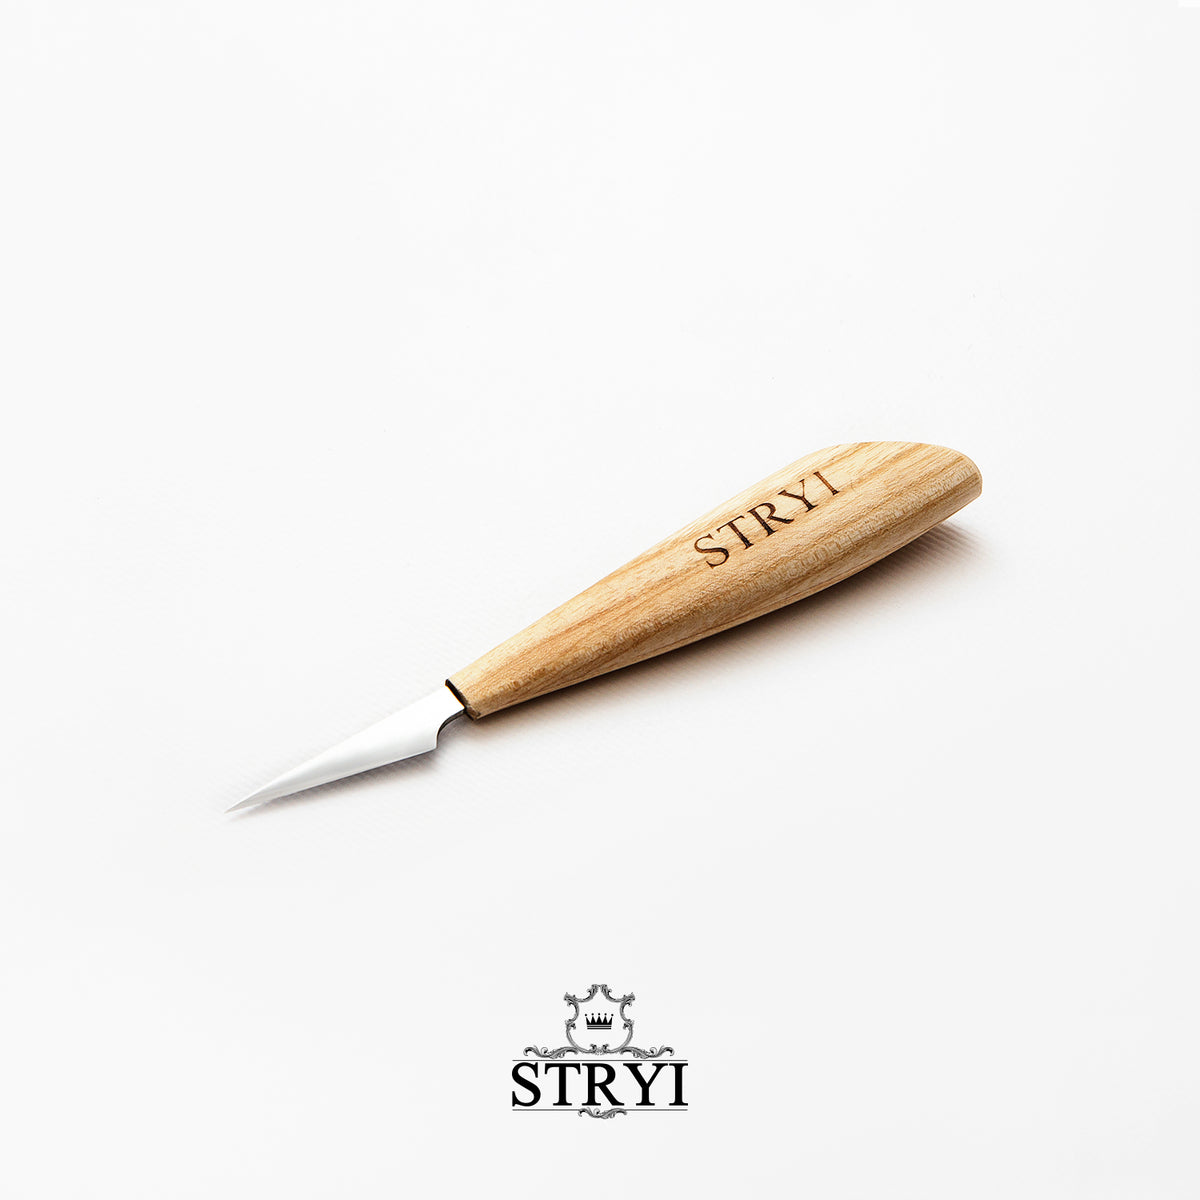 Wood carving knife 40mm STRYI Profi for detailed carving, Whittling ...